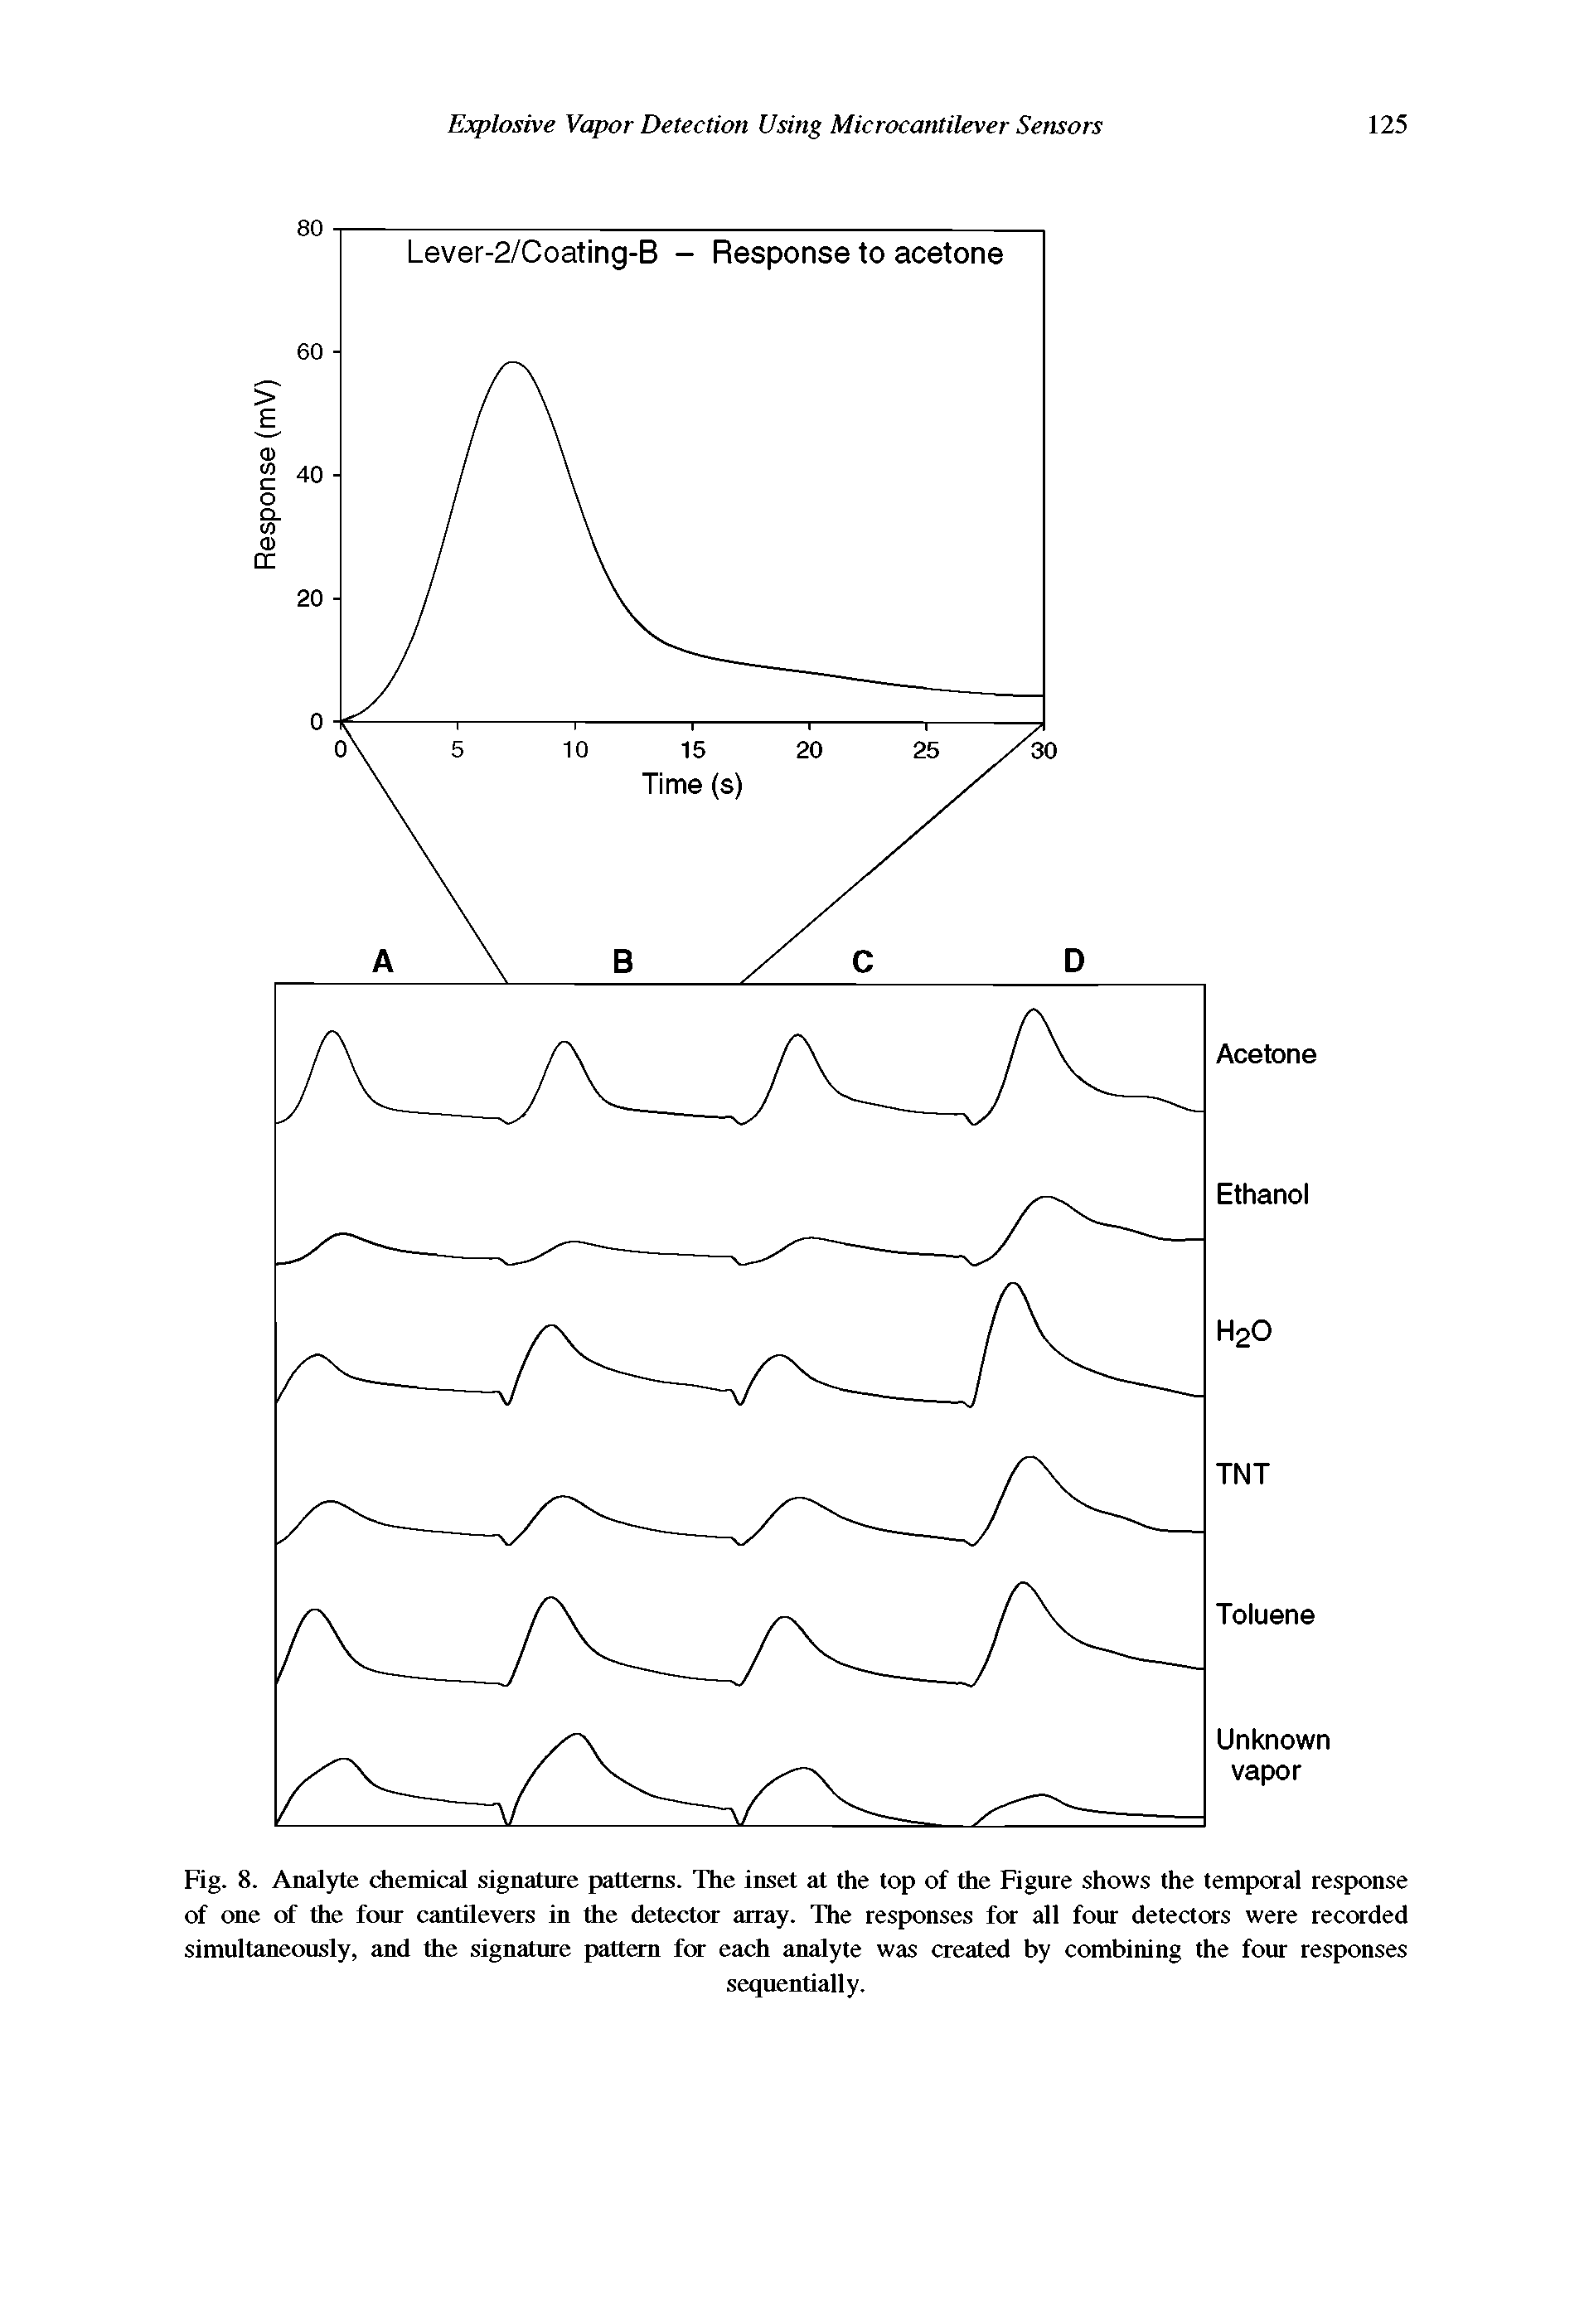 Fig. 8. Analyte chemical signature patterns. The inset at the top of the Figure shows the temporal response of one of the four cantilevers in the detector array. The responses for all four detectors were recorded simultaneously, and the signature pattern for each analyte was created by combining the four responses...